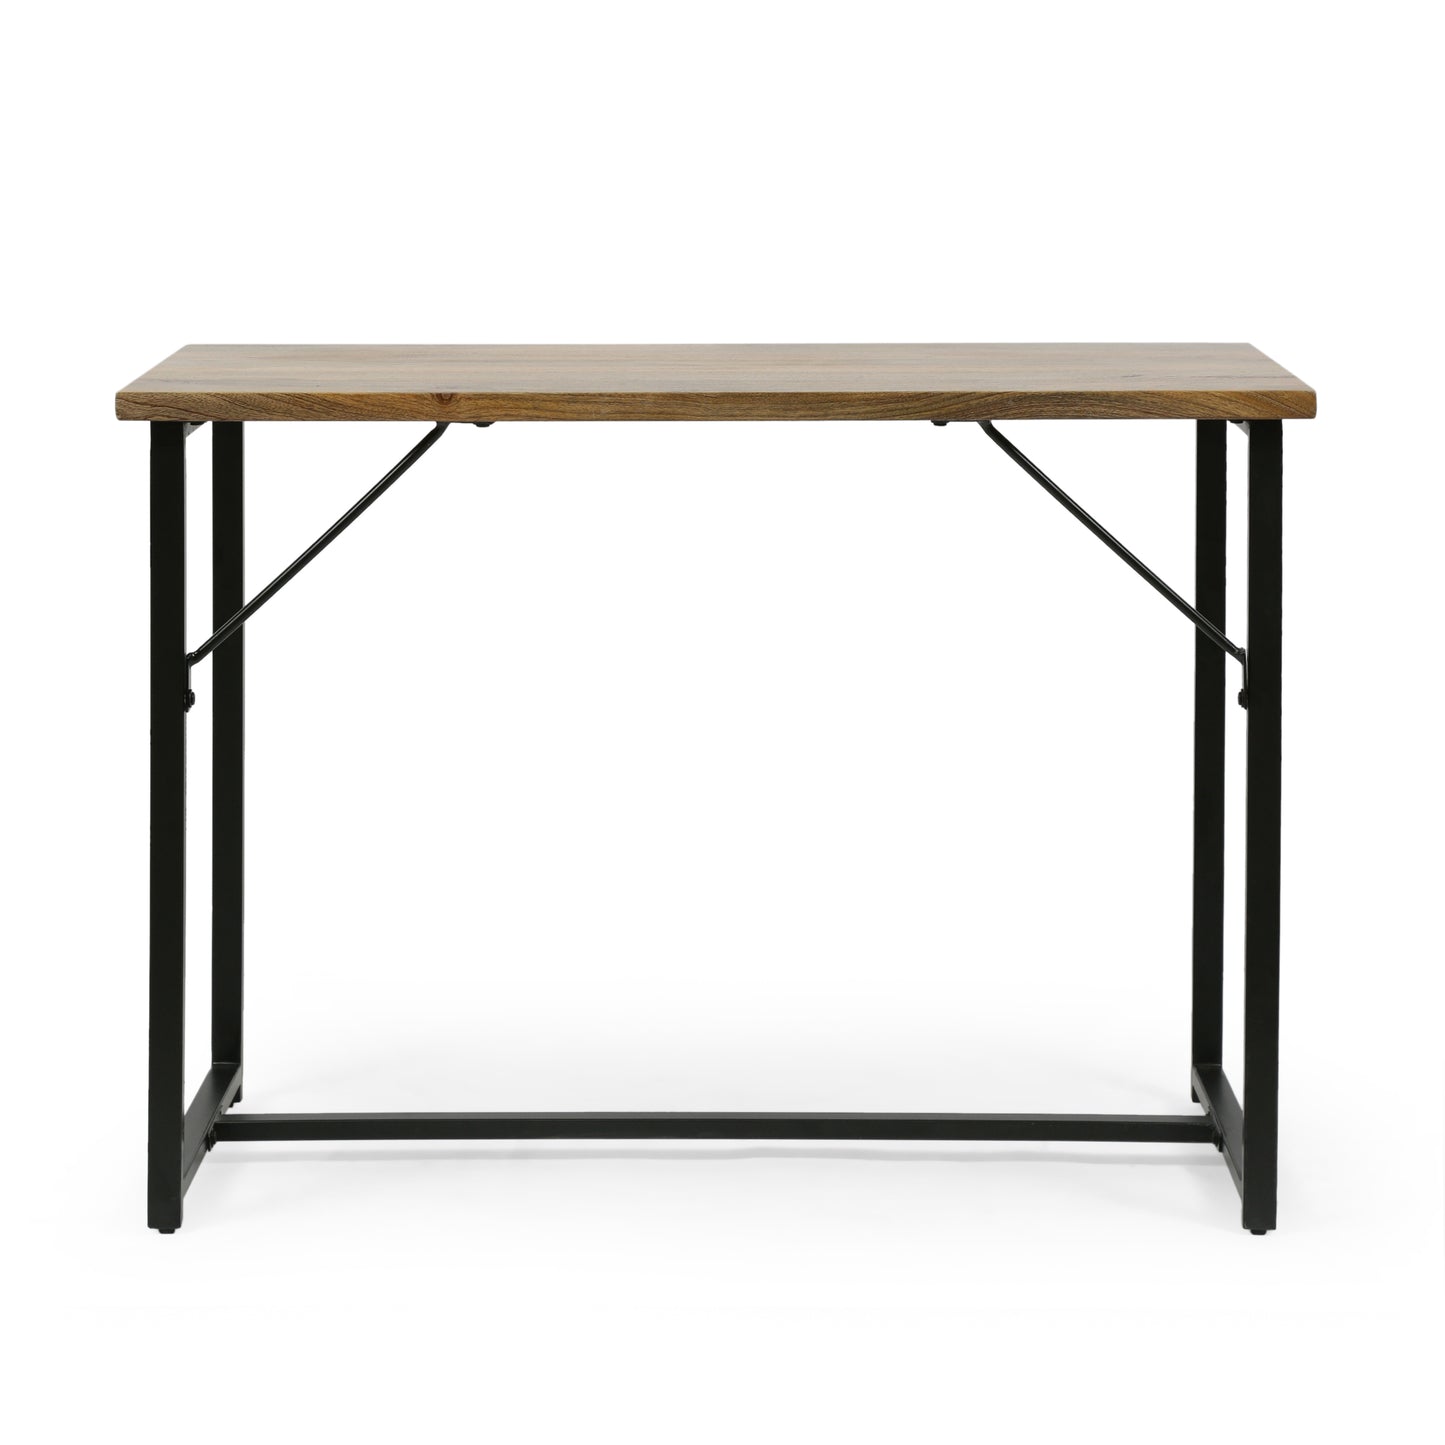 Addyston Modern Industrial Handmade Mango Wood Console Table, Honey Brown and Black